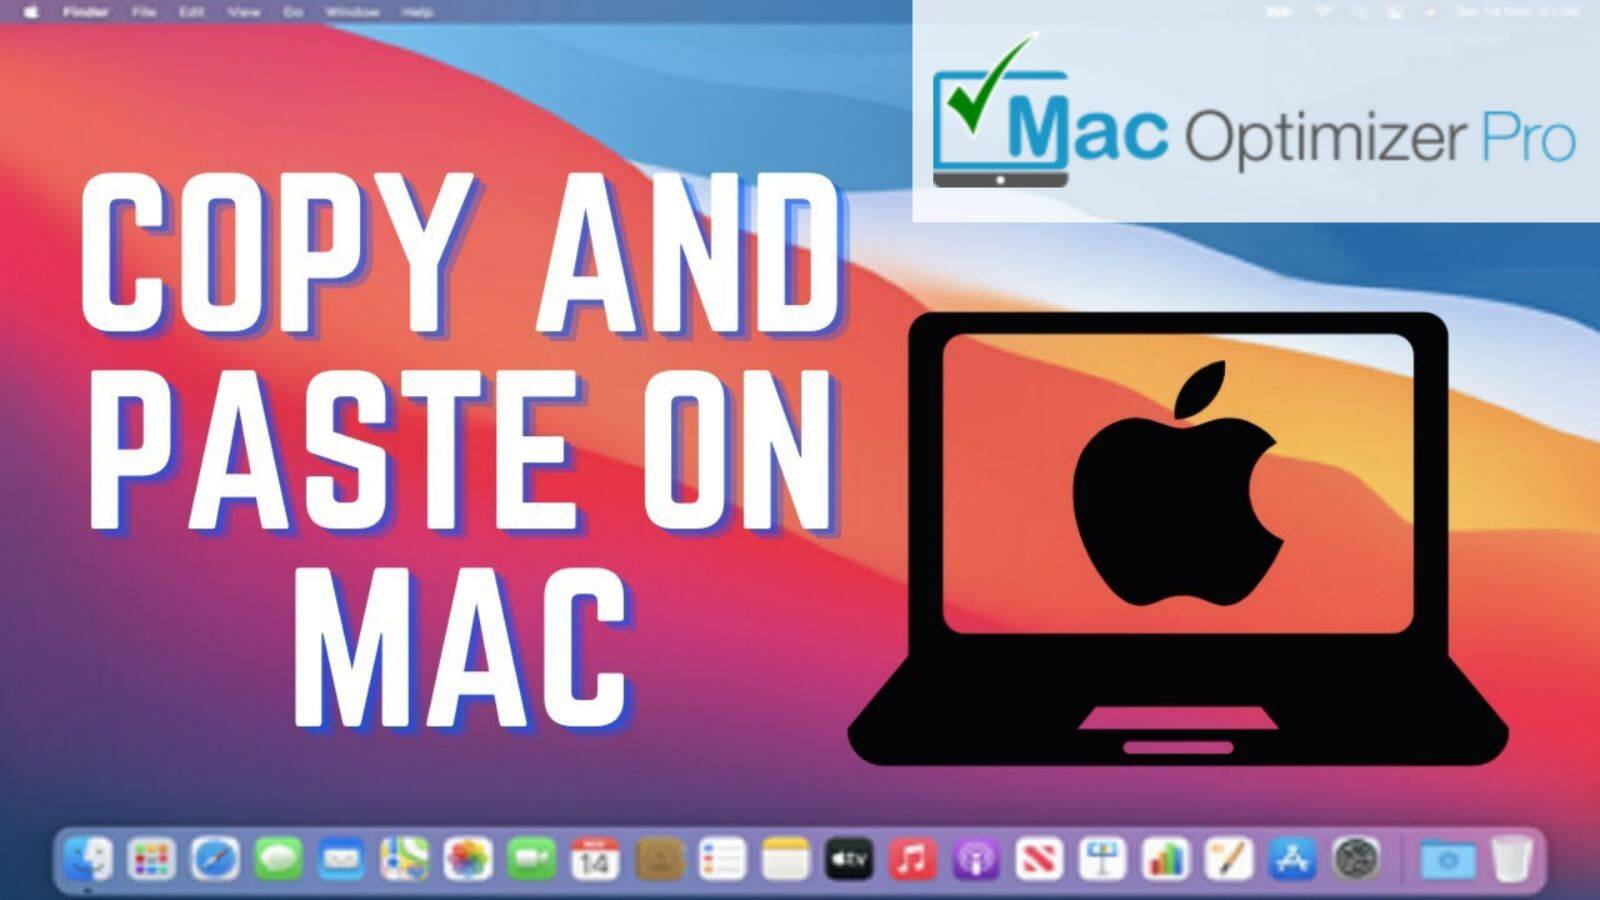 copy and paste on a Mac